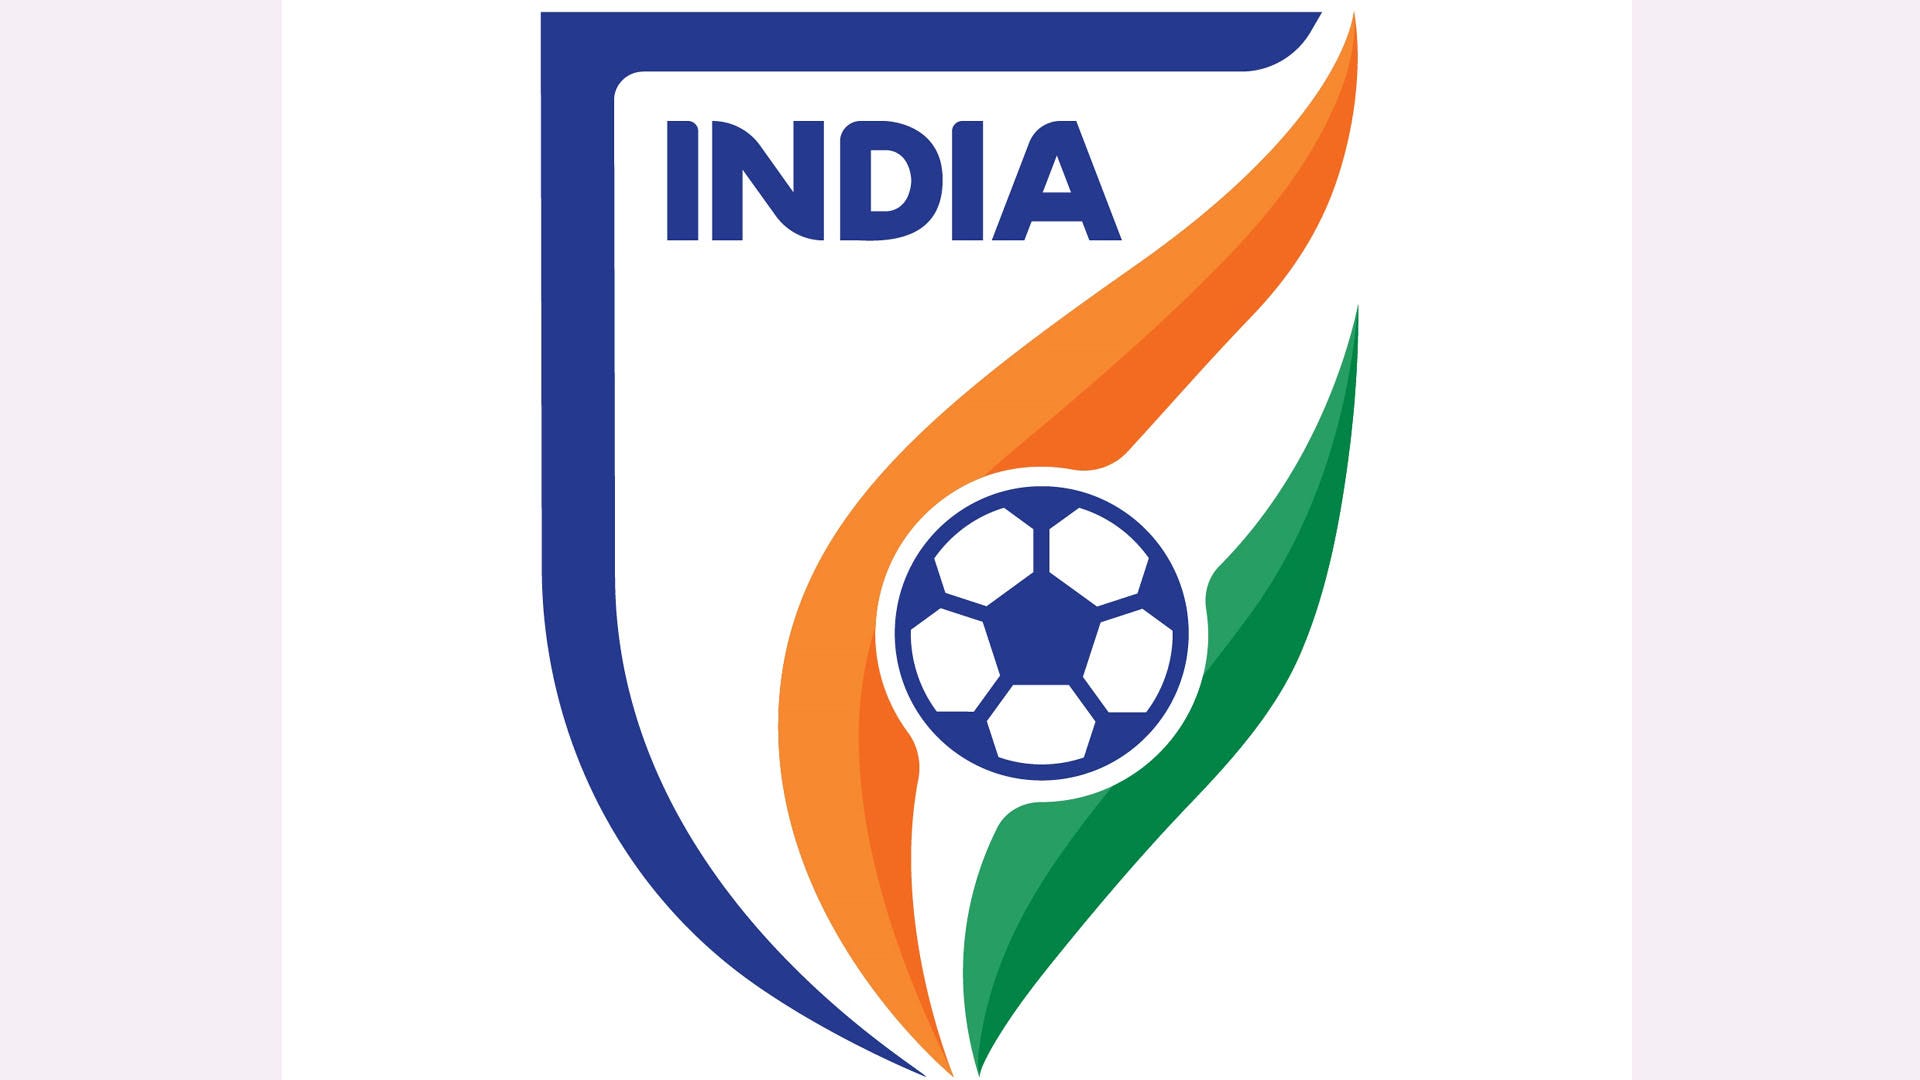 All India Football Federation nominated for AFC Developing Award - Sports  News | The Financial Express